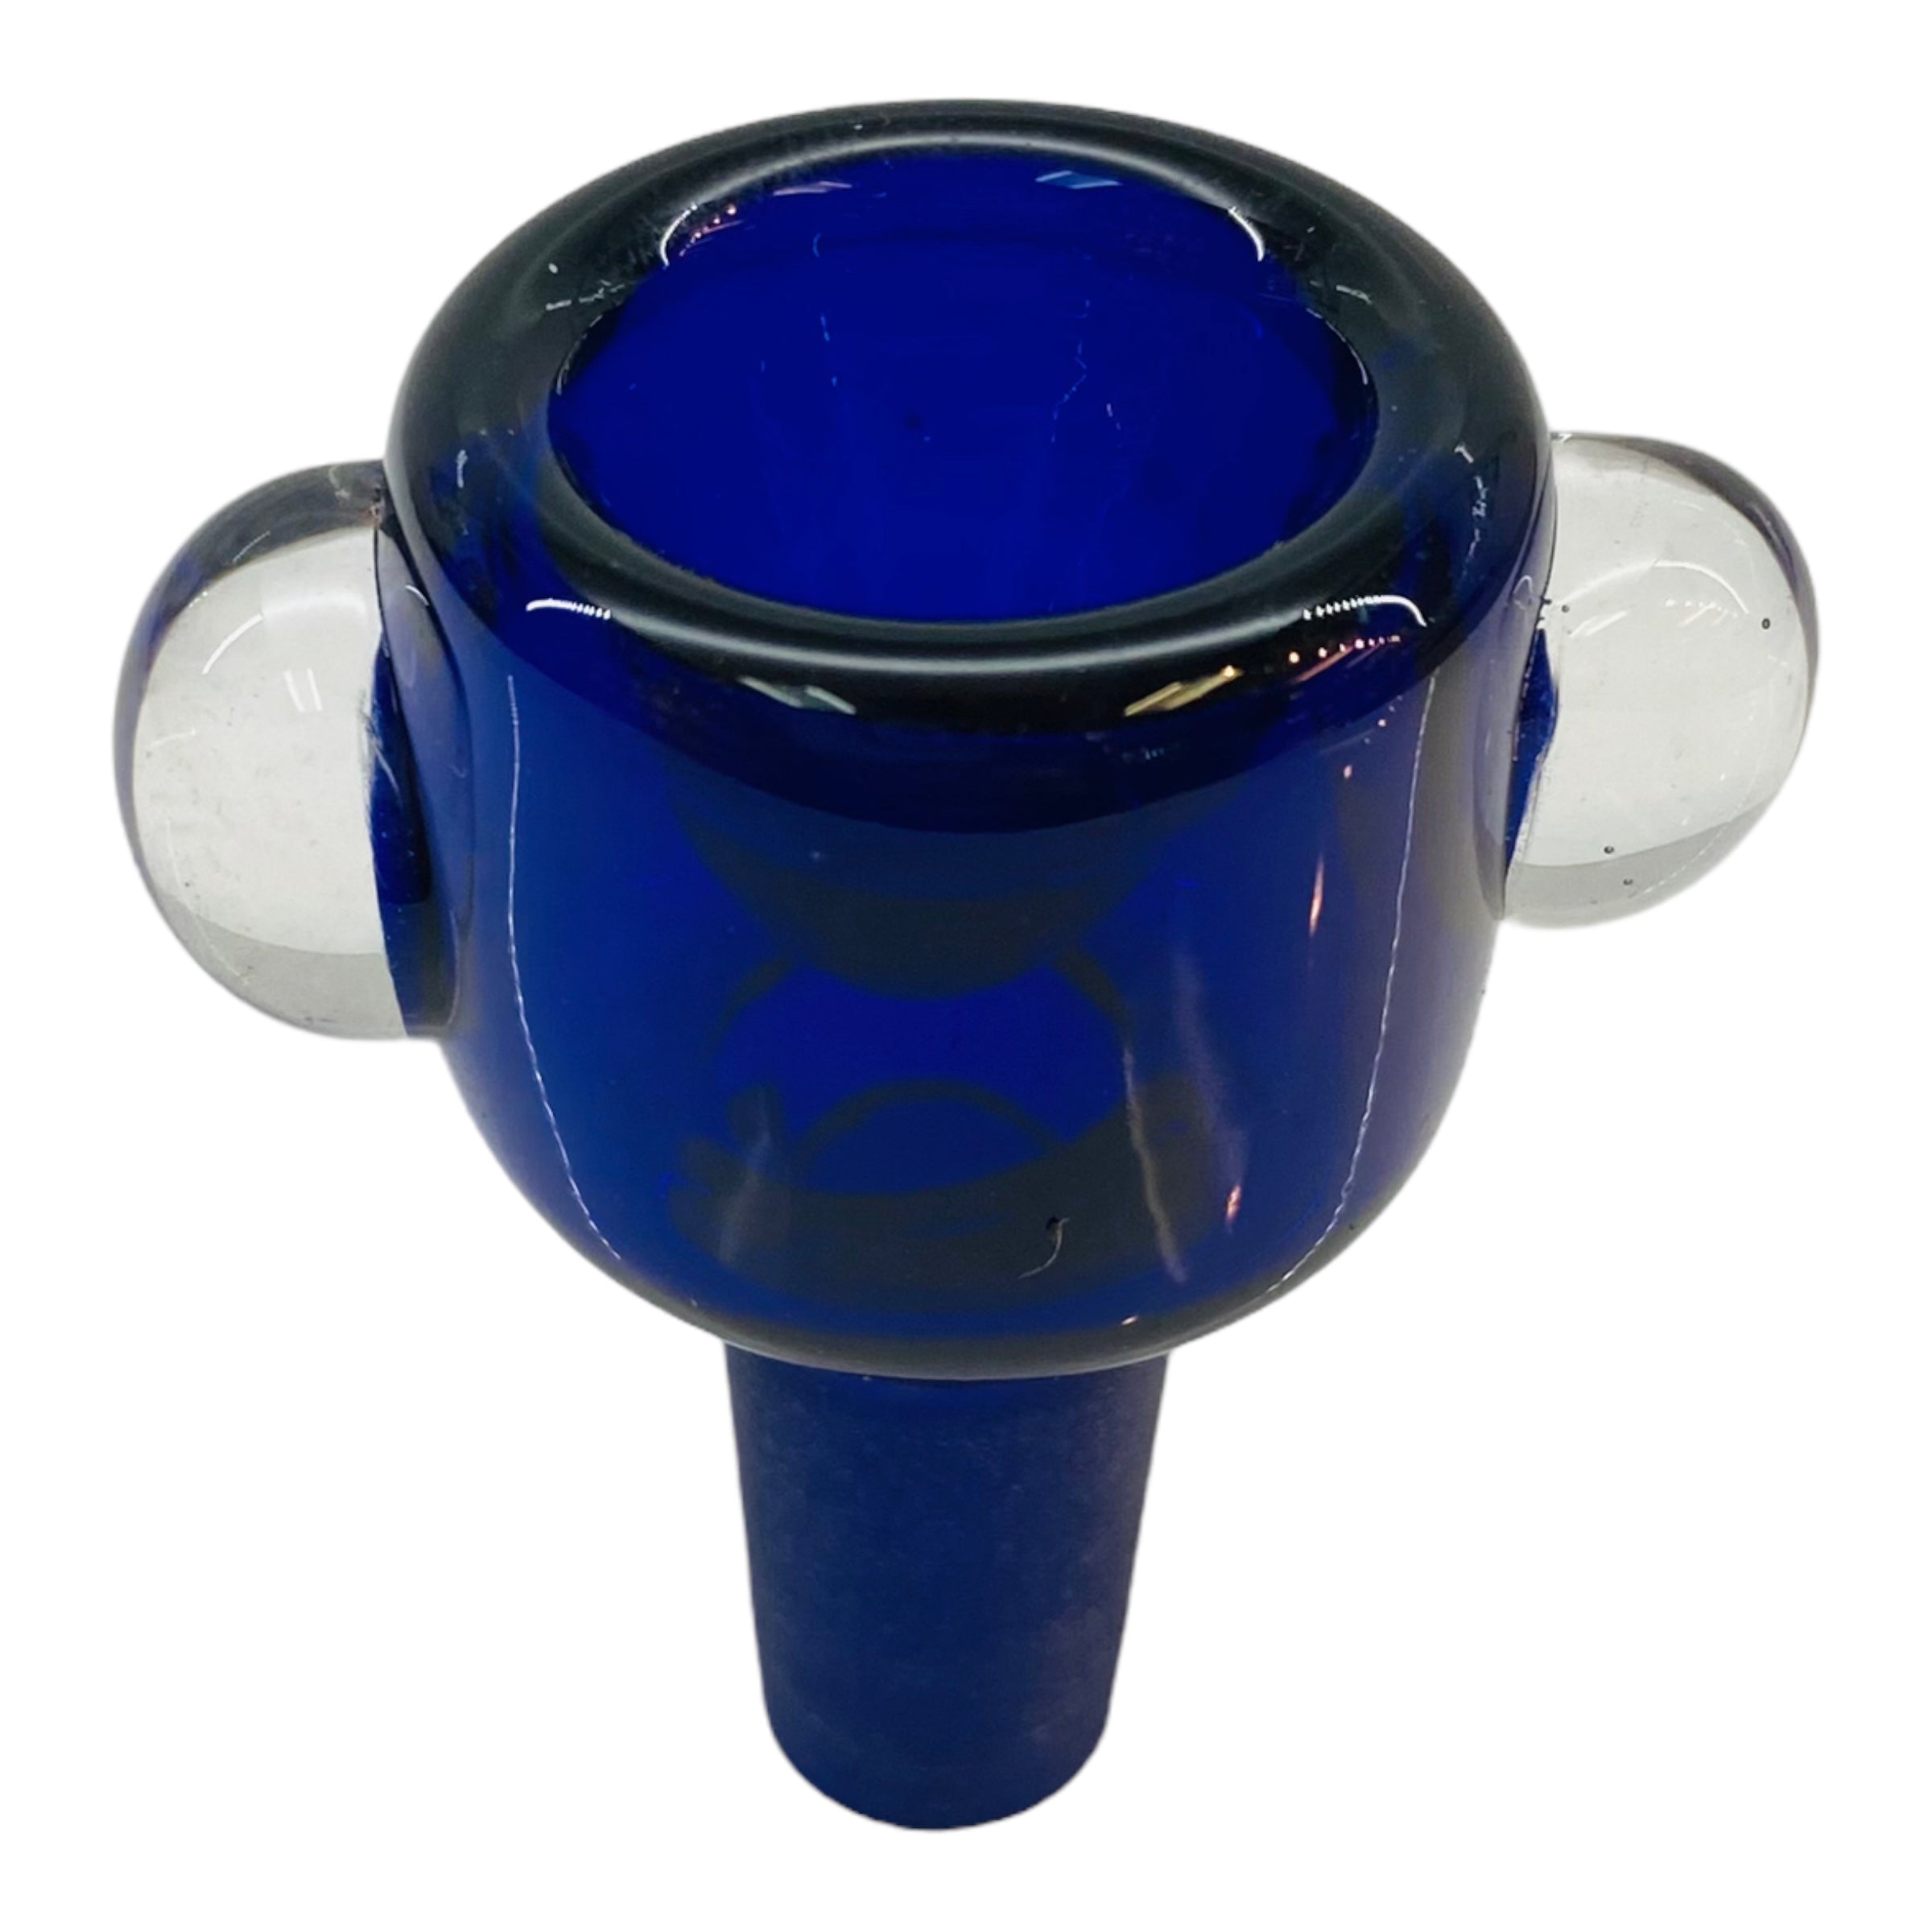 14mm Flower Bowl - Tall Straight Wall Bubble Bong Bowl Piece - Blue